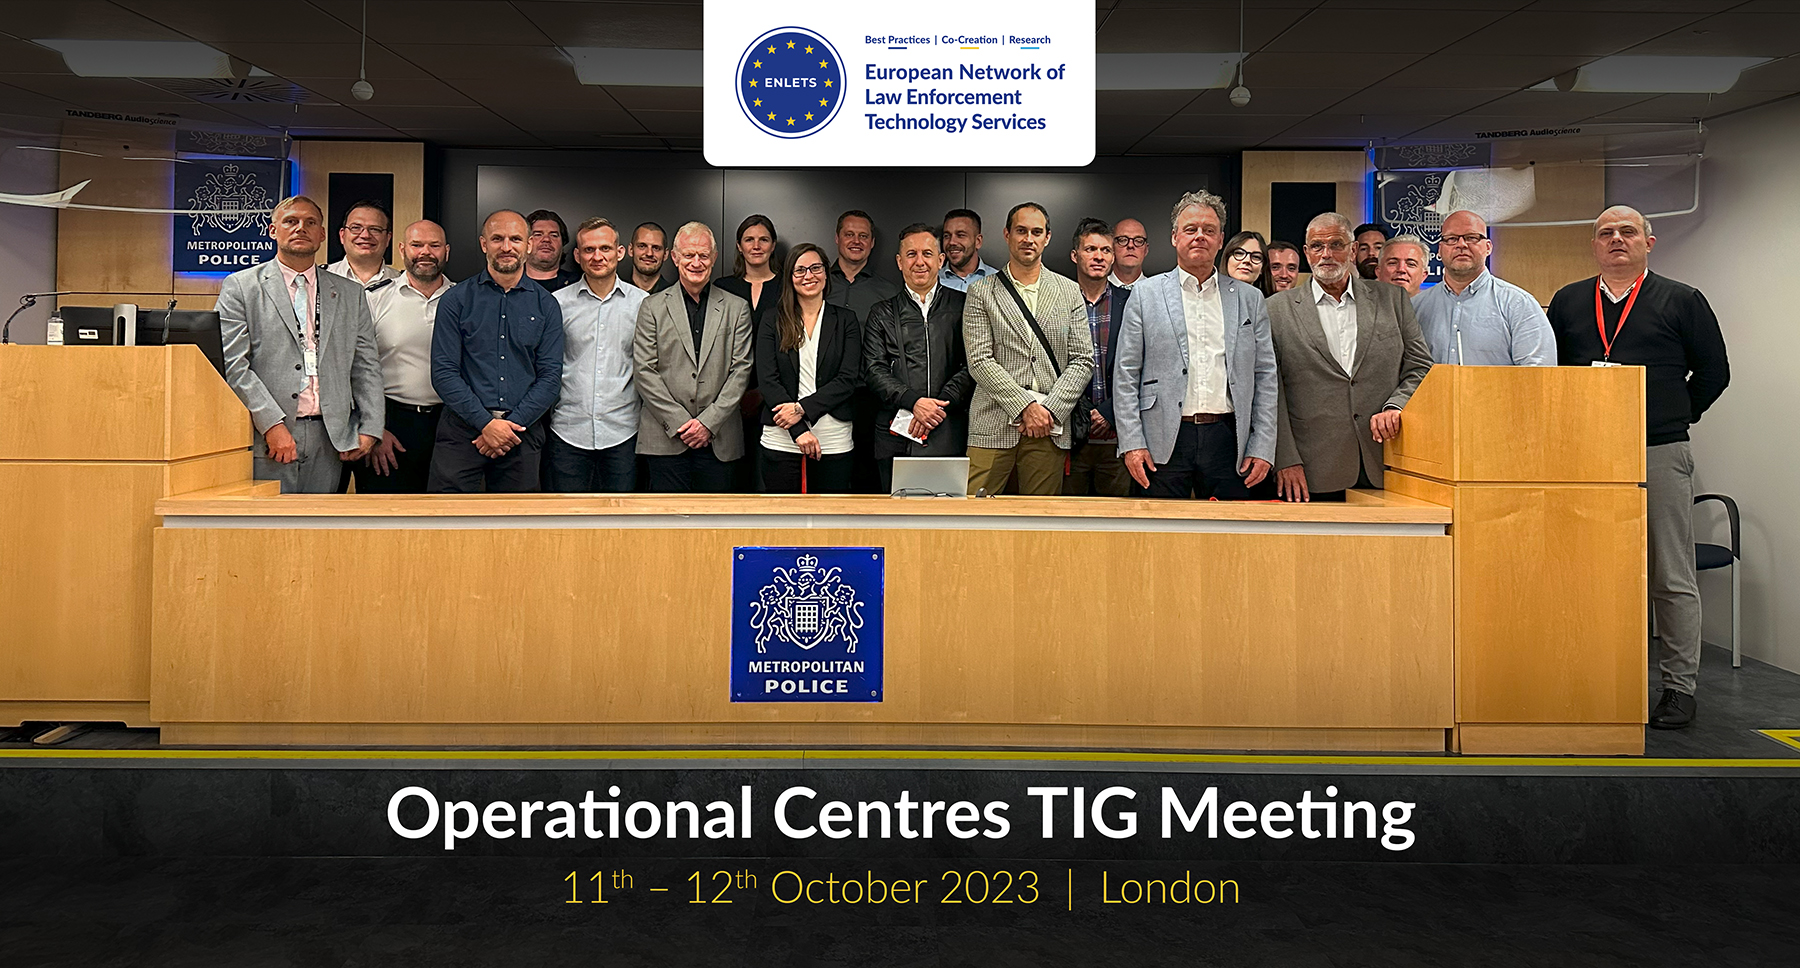 Operational Centres TIG Meeting in London